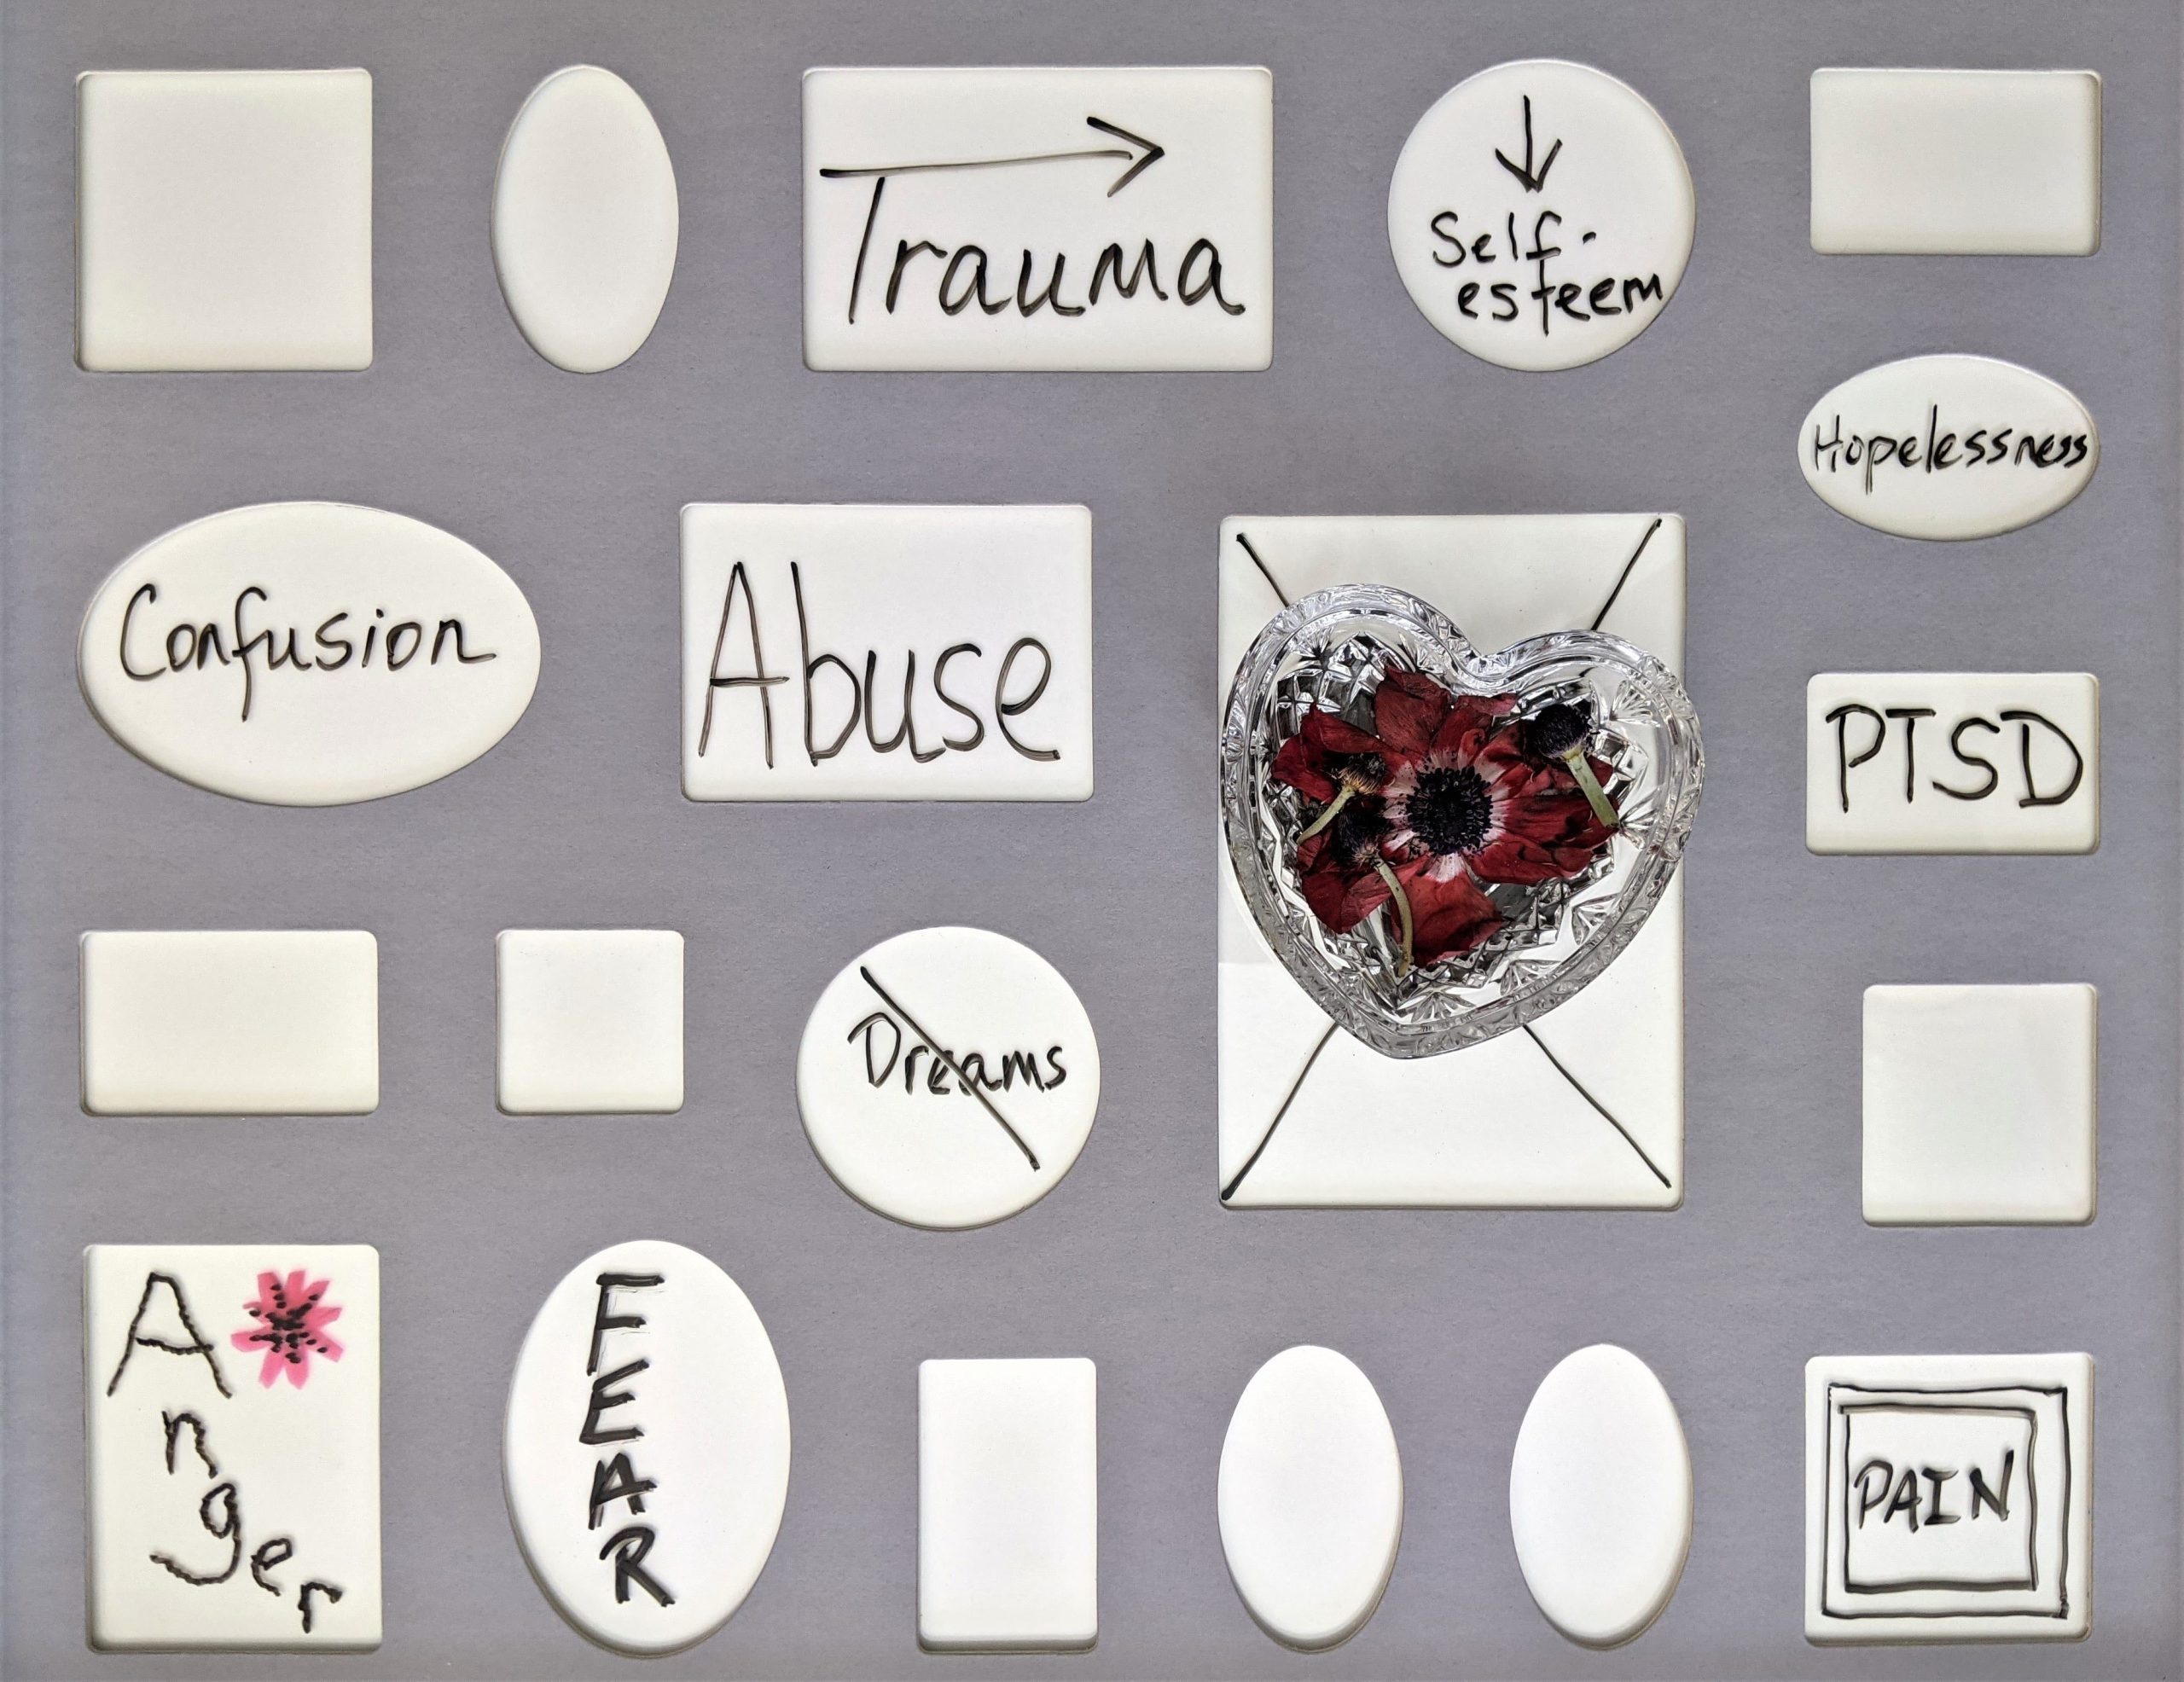 Image with shapes with words written on them including trauma, confusion, self-esteem, anger, fear, pain, PTSD, hopelessness, dreams (crossed out). There is also a metal heart shaped bowl with detailed metal work and a flower inside